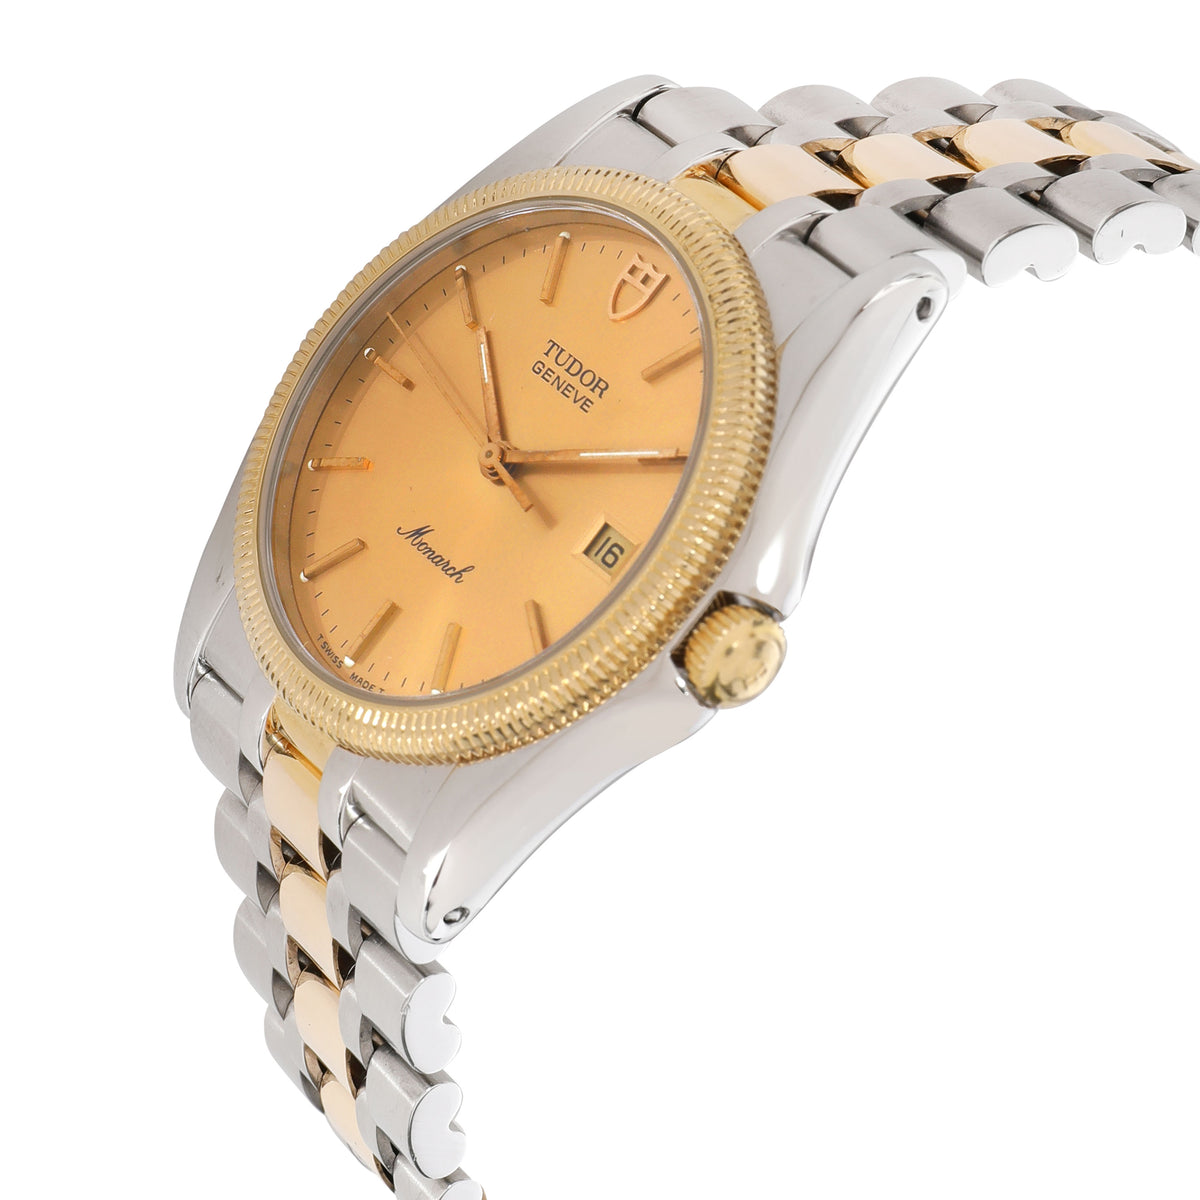 Tudor Monarch 15633 Men's Watch in 18kt Stainless Steel/Yellow Gold